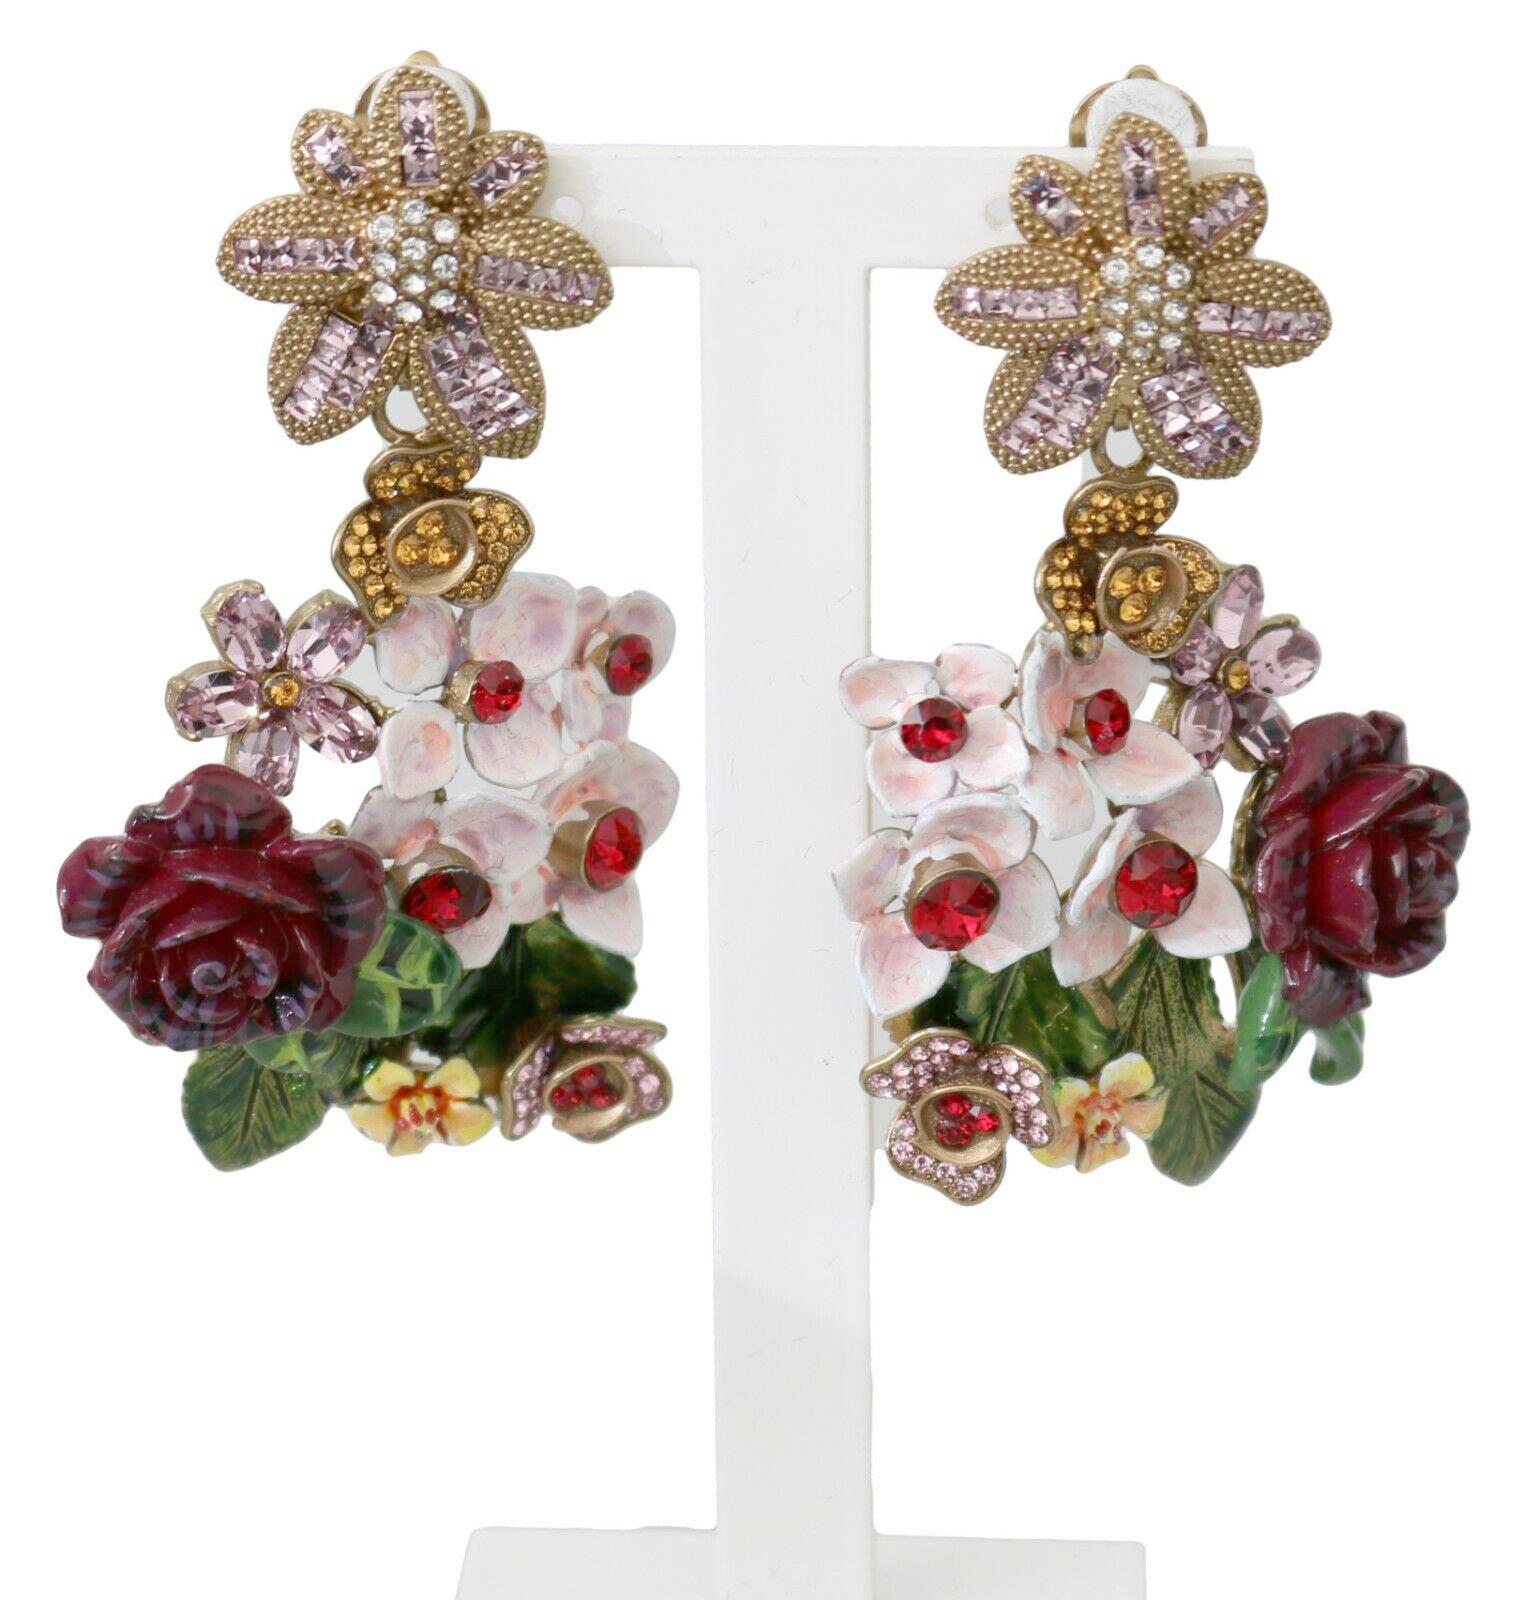 Gorgeous brand new with tags, 100% authentic Dolce & Gabbana earrings.

Model: Clip-on, dangling
Pattern: flowers
Material: 60% Brass, 20% Glass, 20% Crystals

Color: Gold, White, Green
Crystals: Violet, Red, Gold
Logo details
Made in Italy

Length: